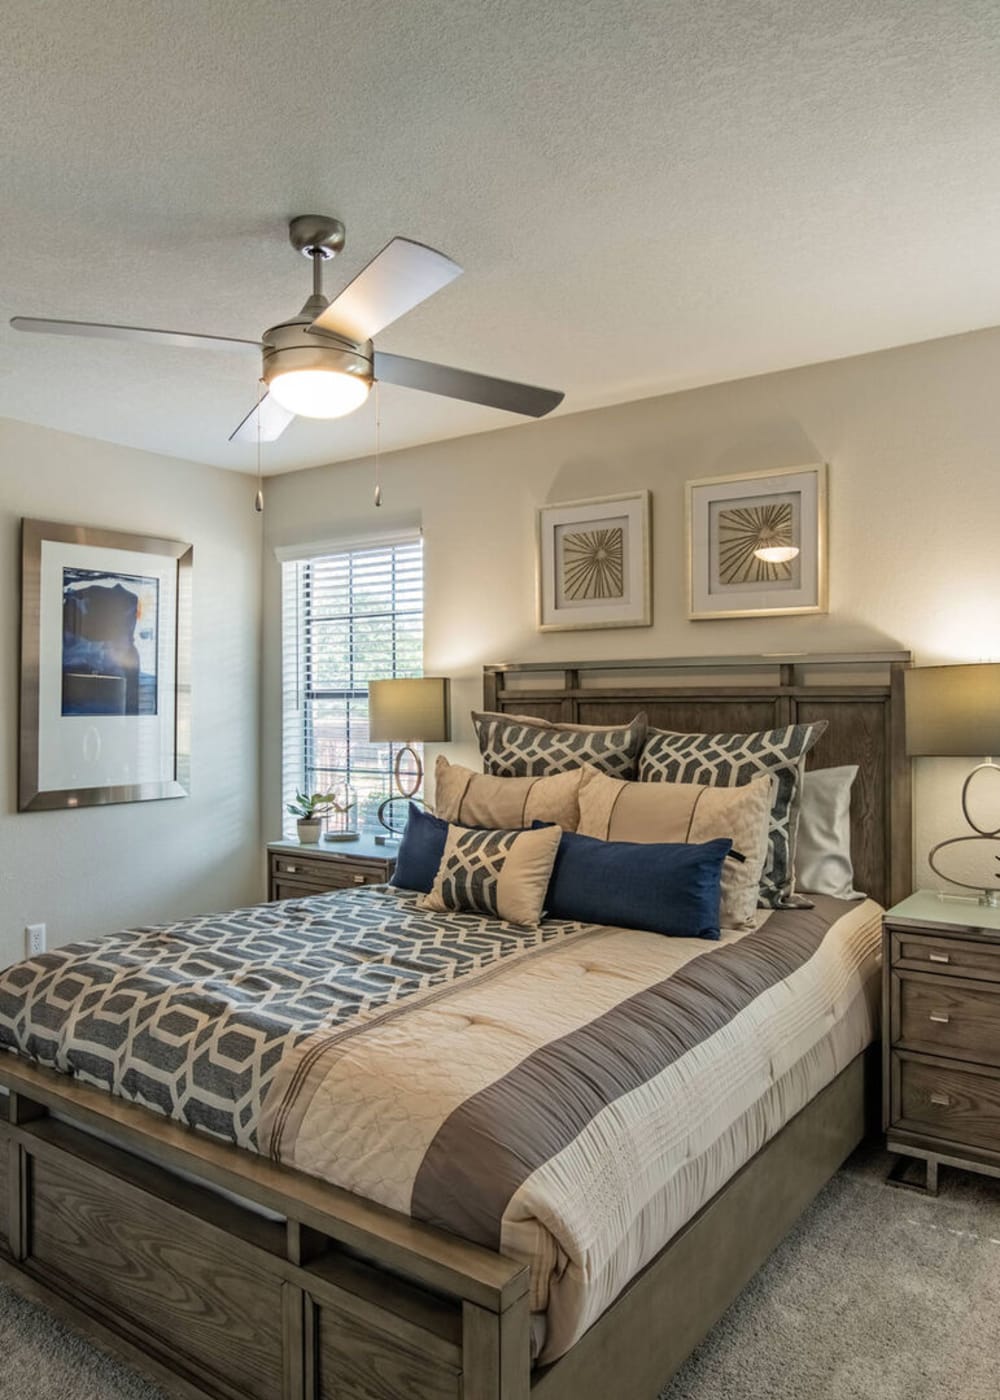 Bedroom at Overlook at Bear Creek in Euless, Texas